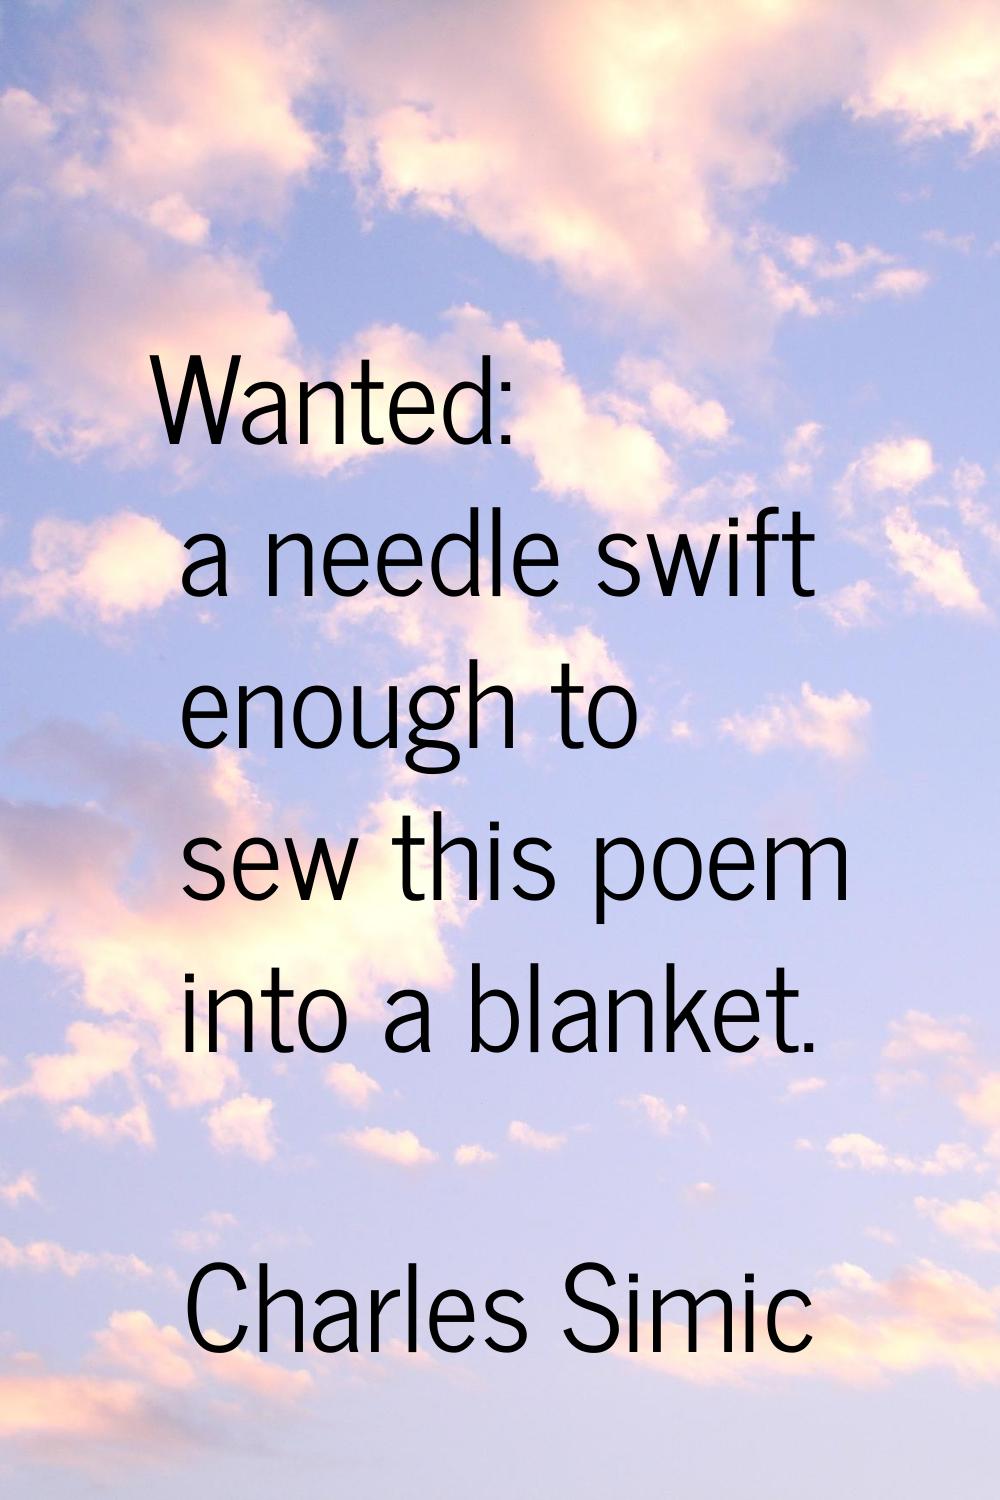 Wanted: a needle swift enough to sew this poem into a blanket.